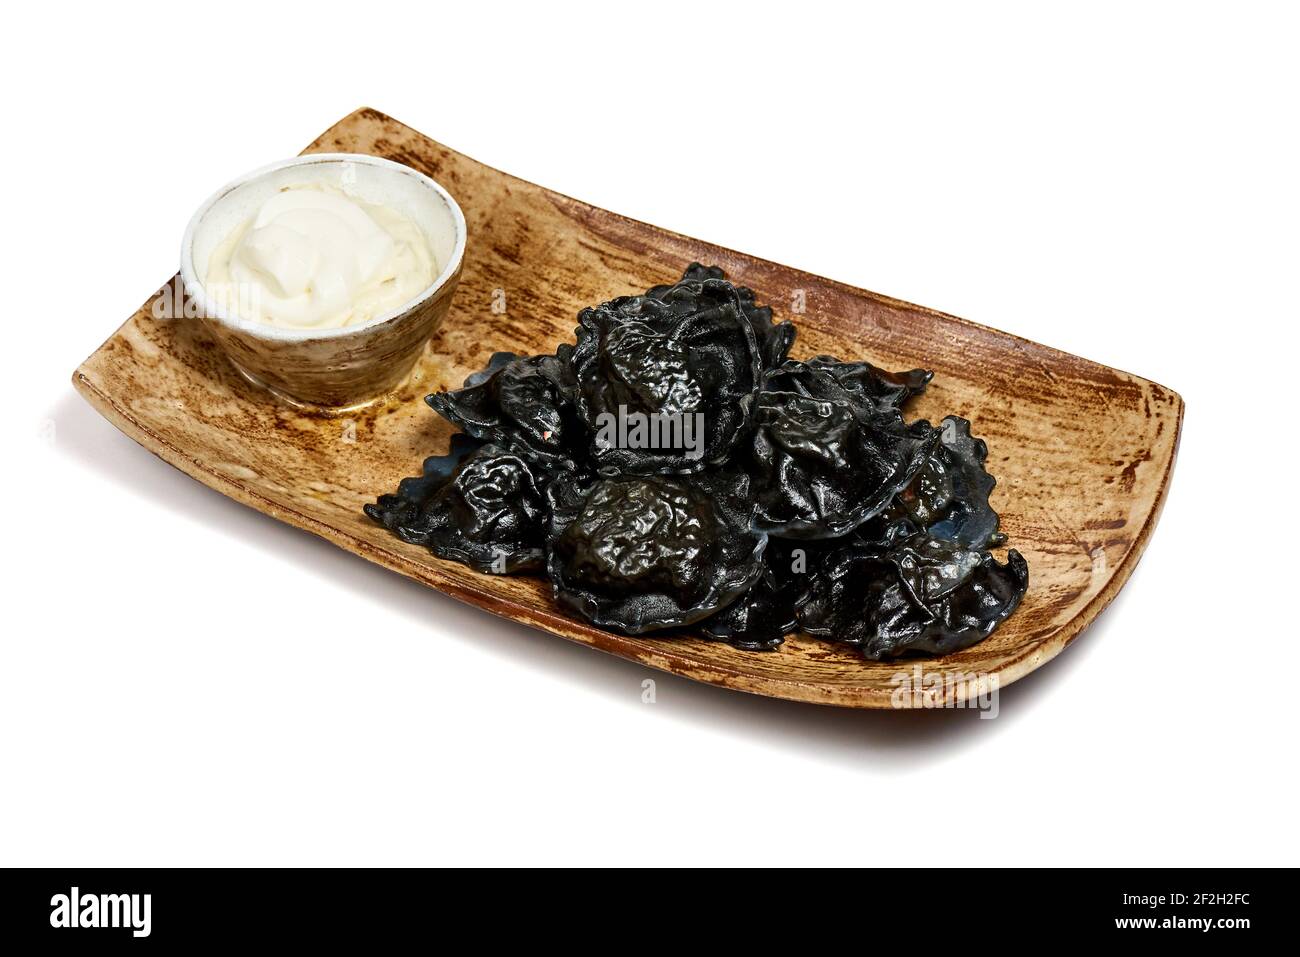 Black dim sum on a wooden plate on a white background. Stock Photo